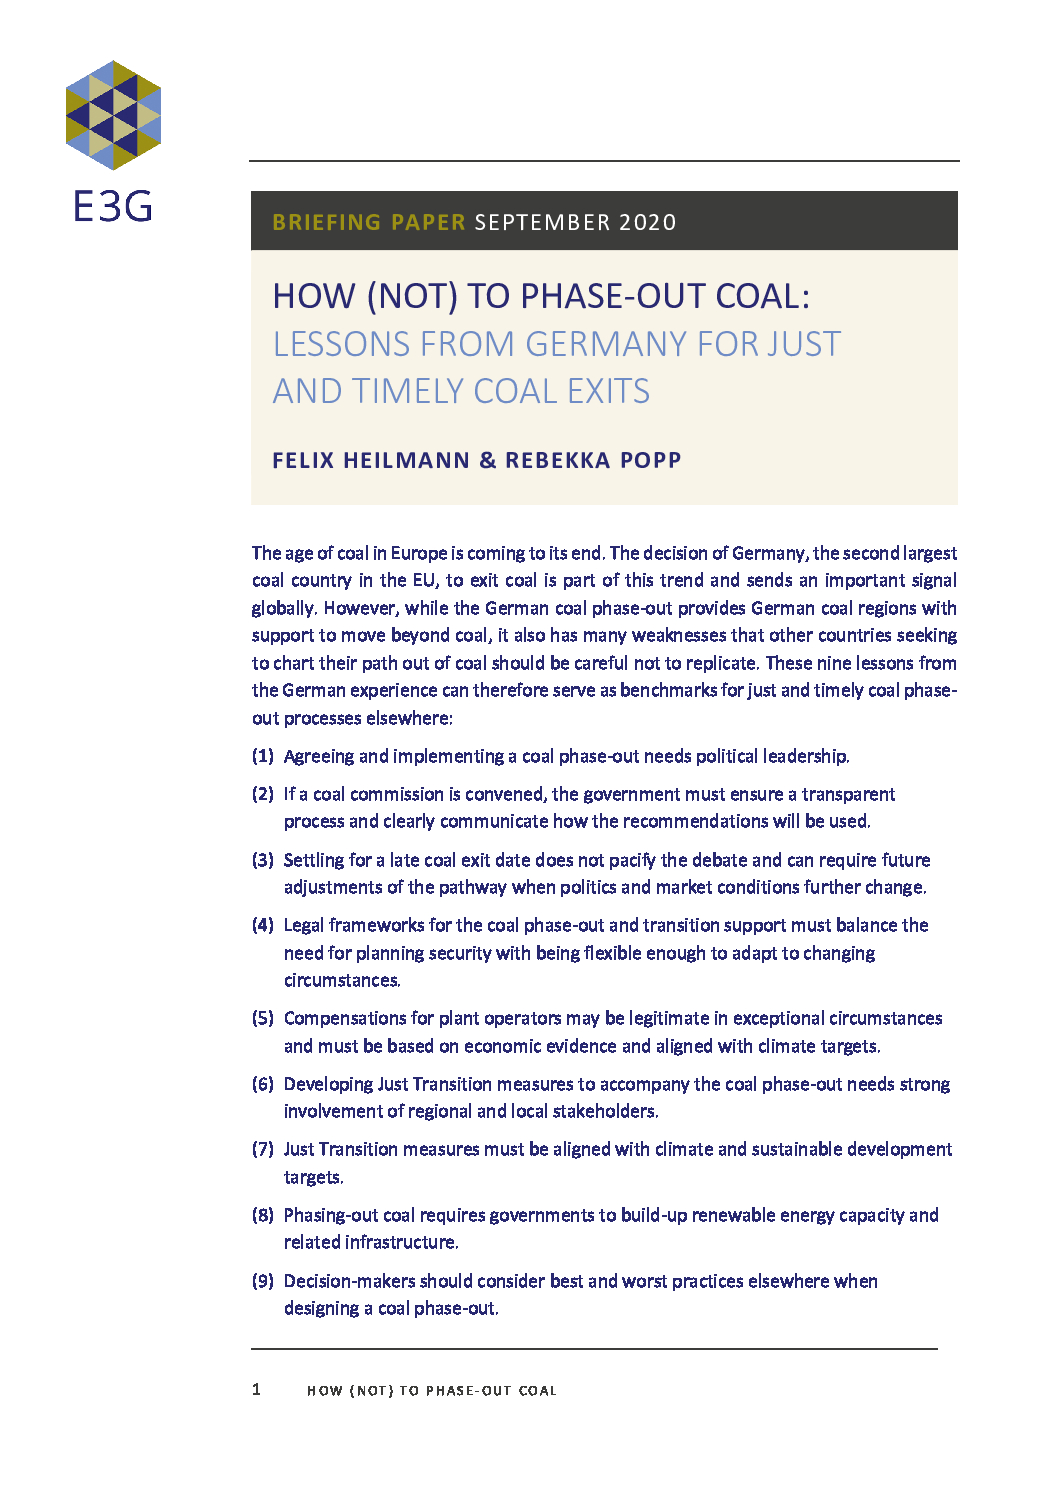 E3G_2020_How-not-to-phase-out-coal